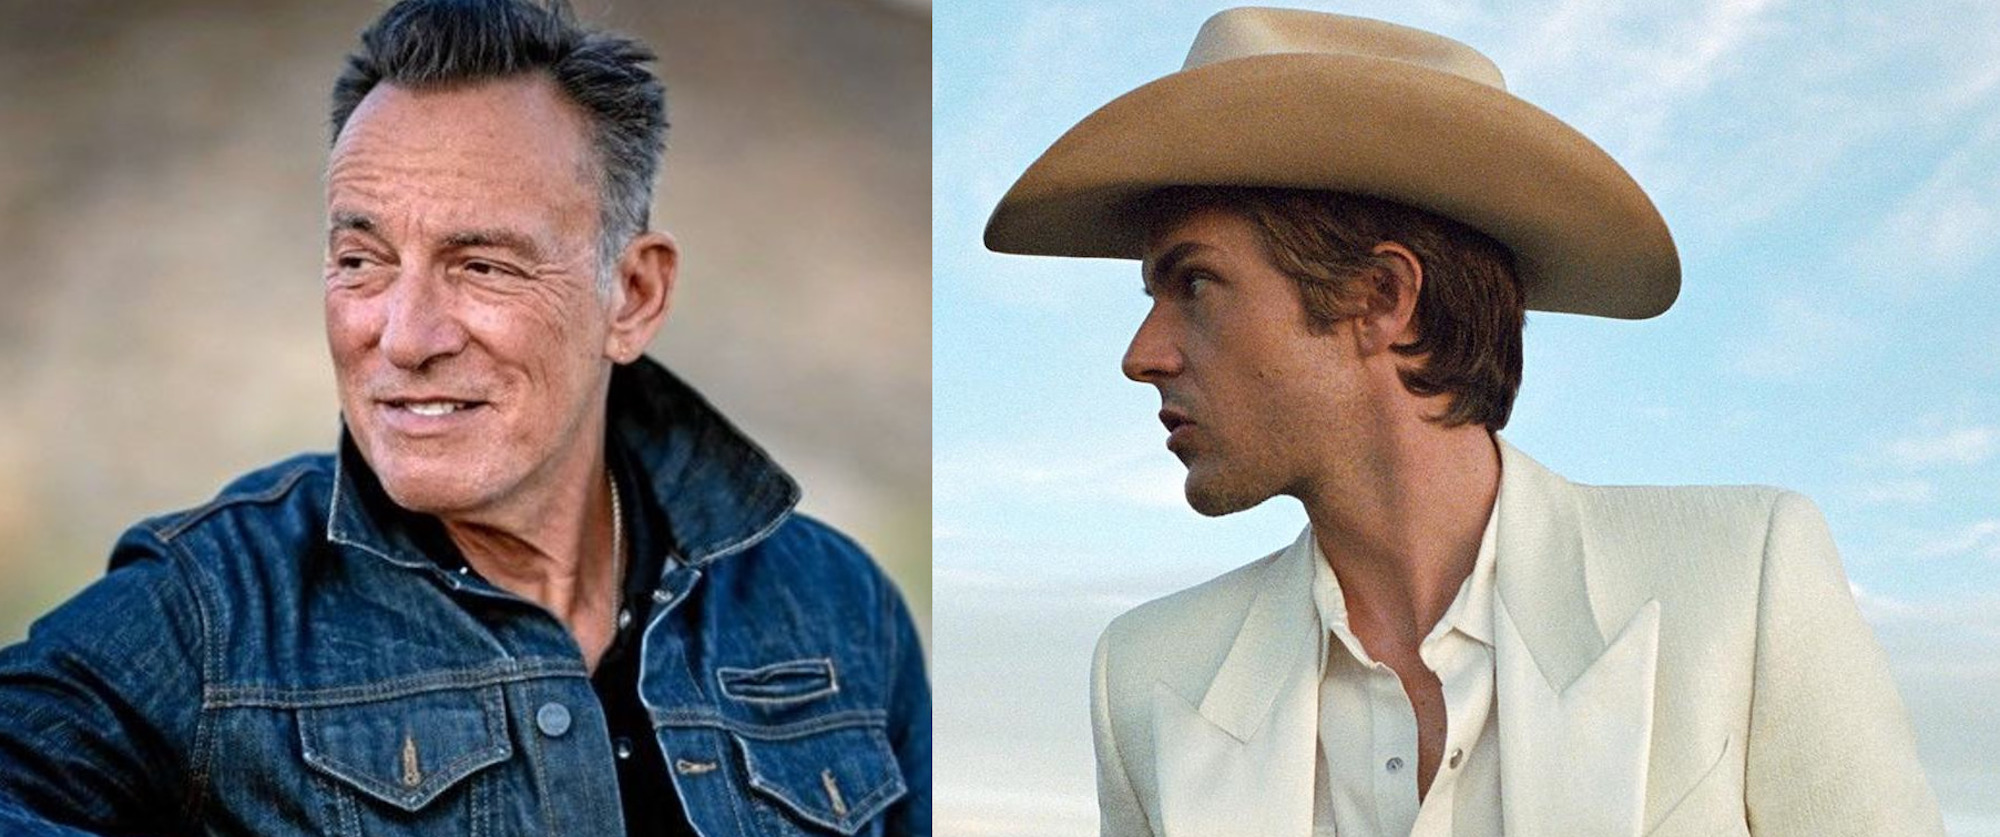 The Killers Re-Record “Dustland Fairytale” Remake with Bruce Springsteen